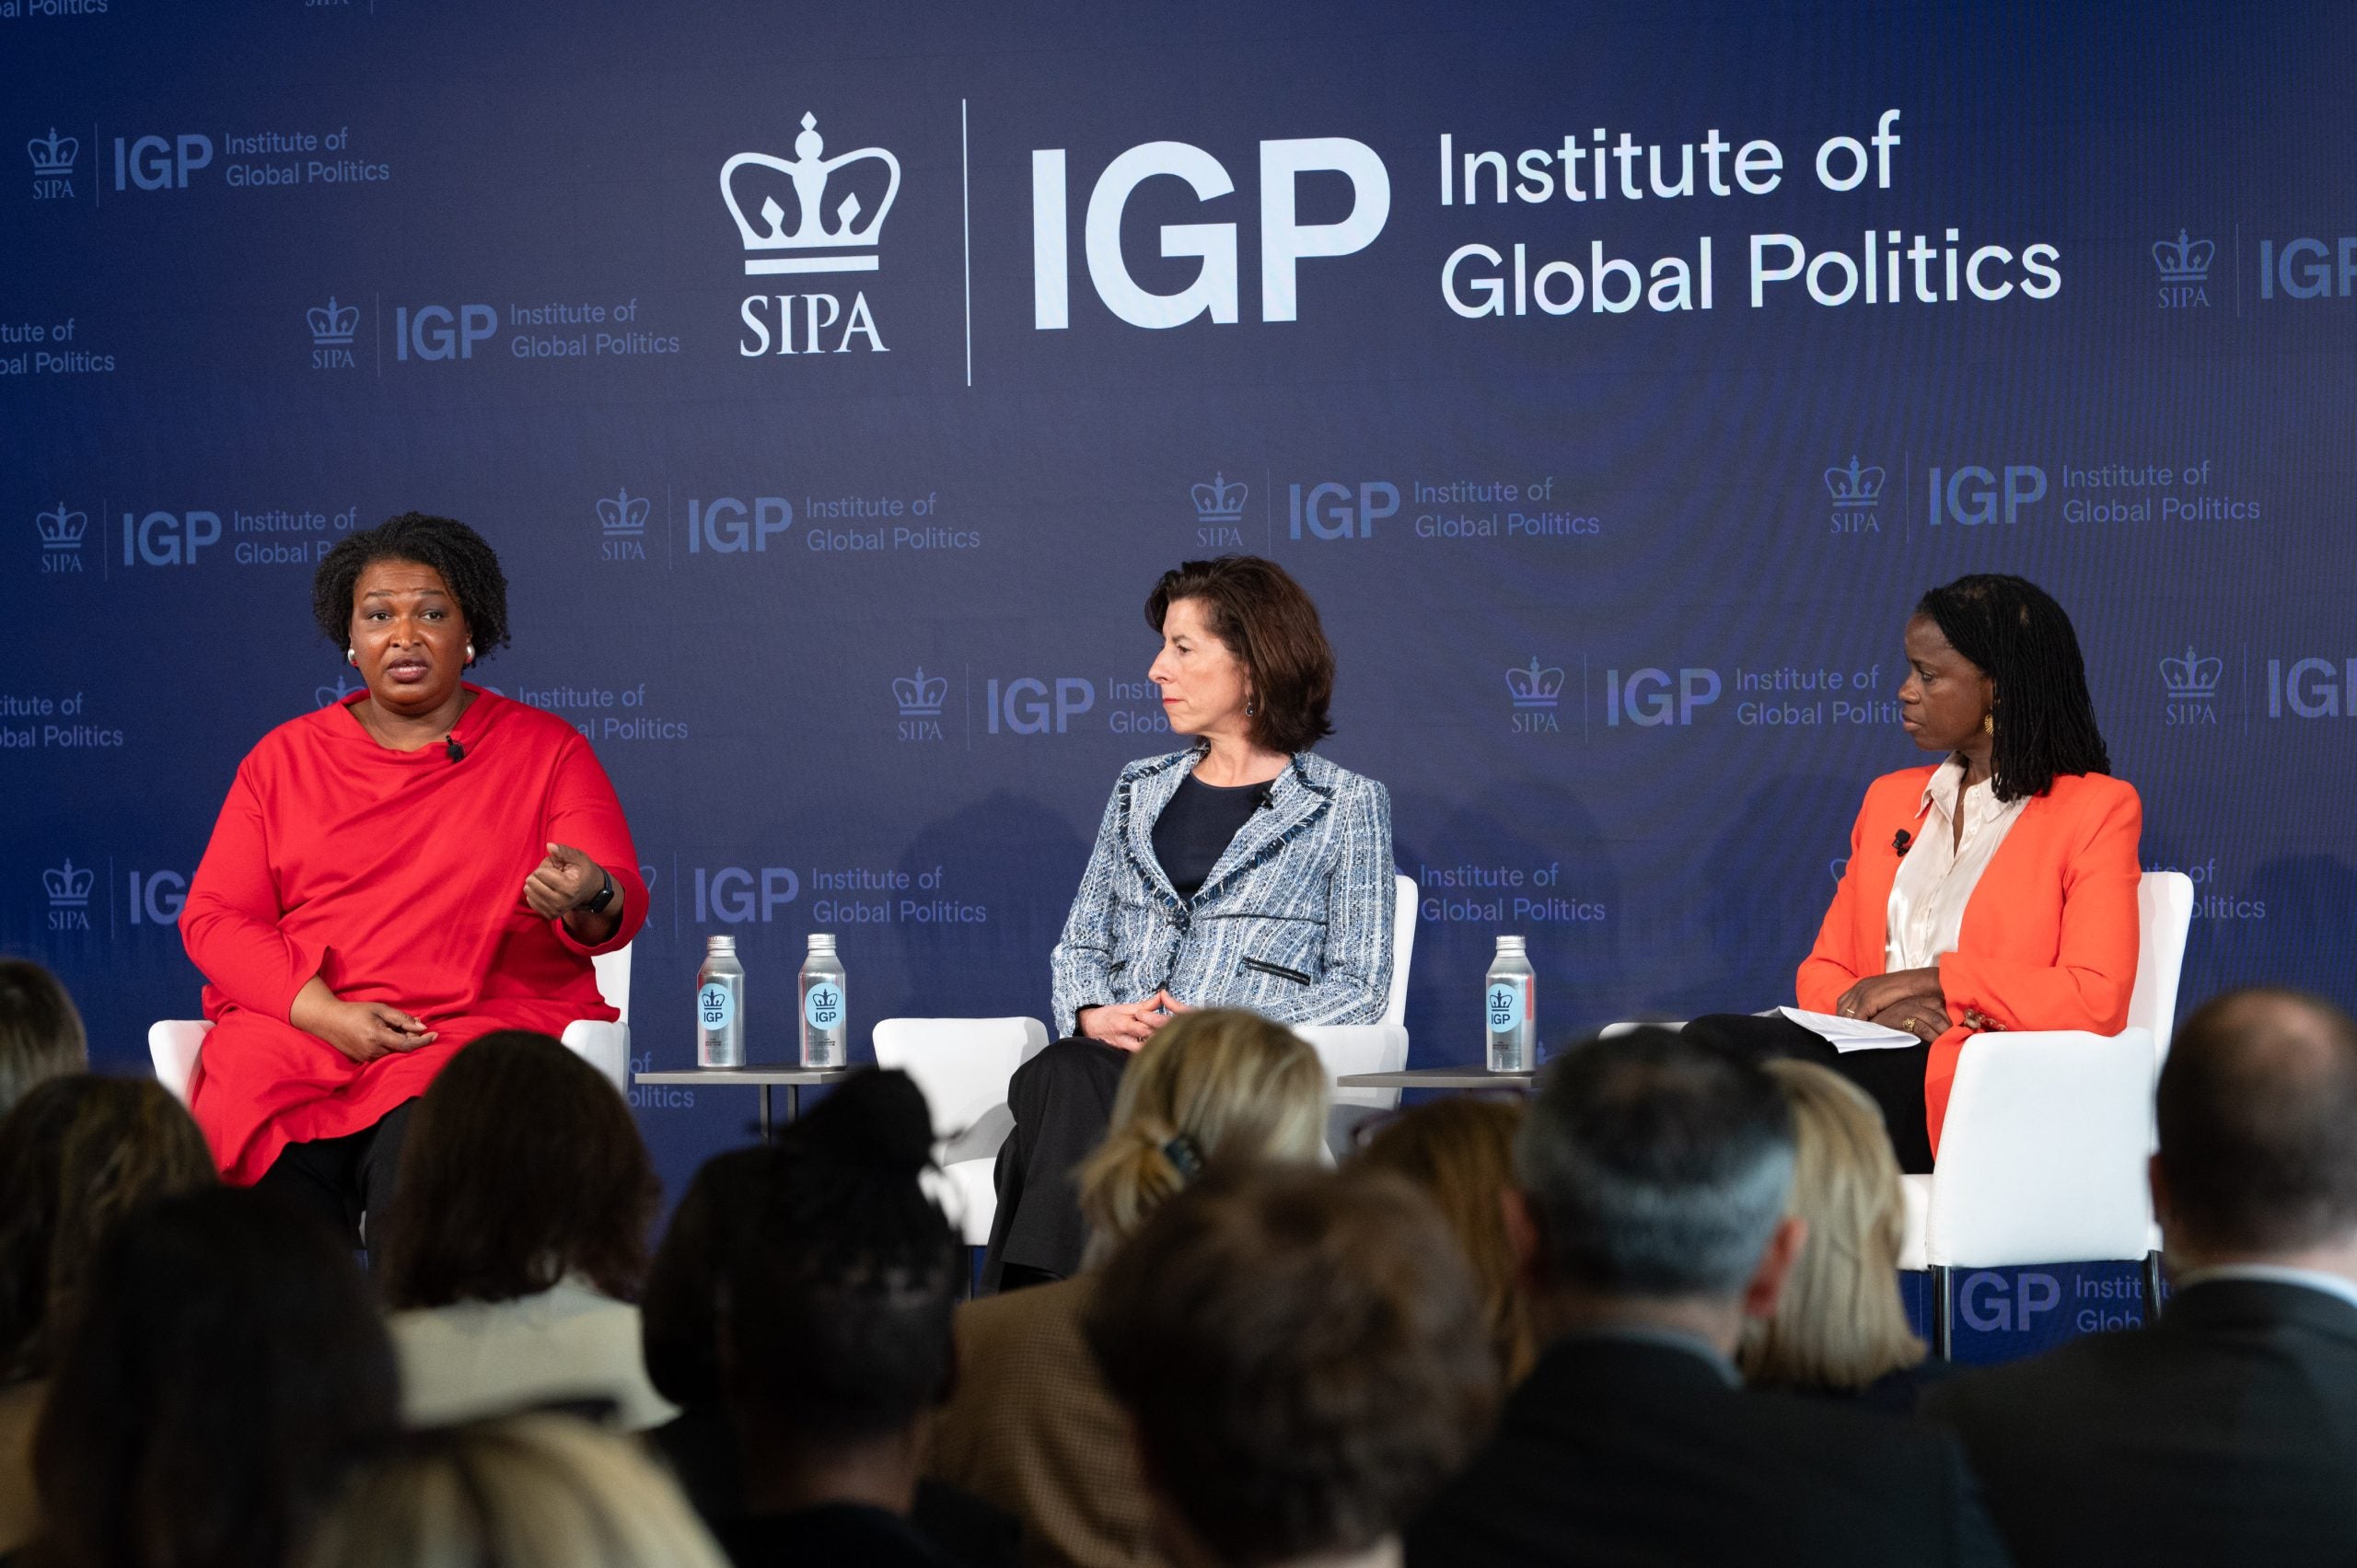 Stacey Abrams: “Women Are Not Only Uniquely And Disproportionately Impacted By Our Global Challenges, They Are Almost Entirely The Solution.”